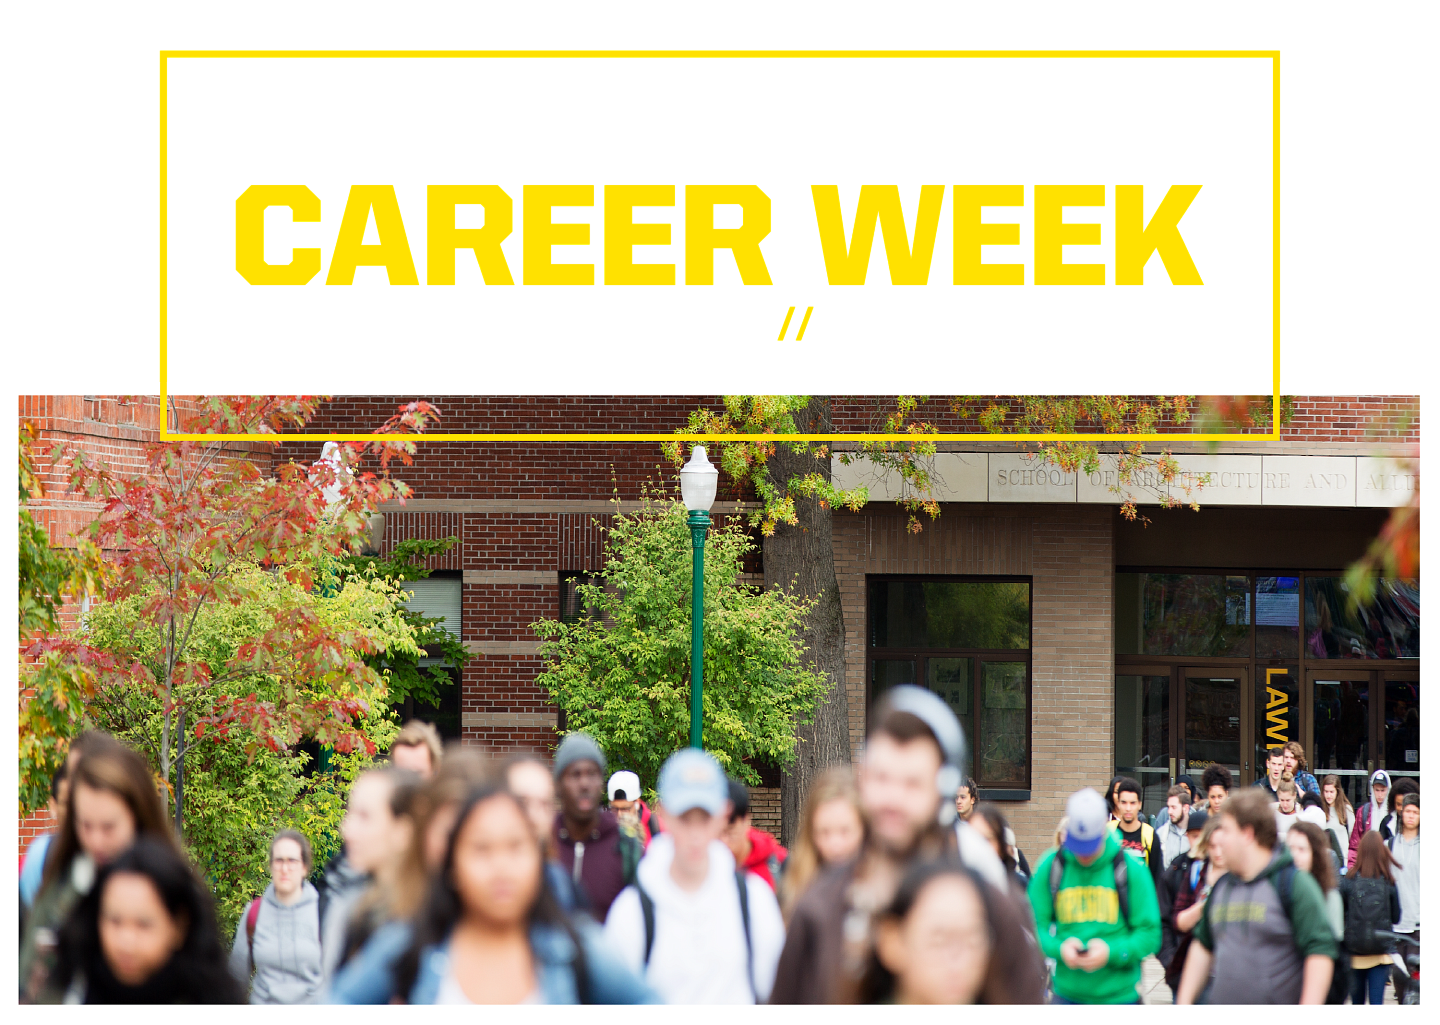 College of Design Career Week. February 12-16, 2024. in Lawrence Hall